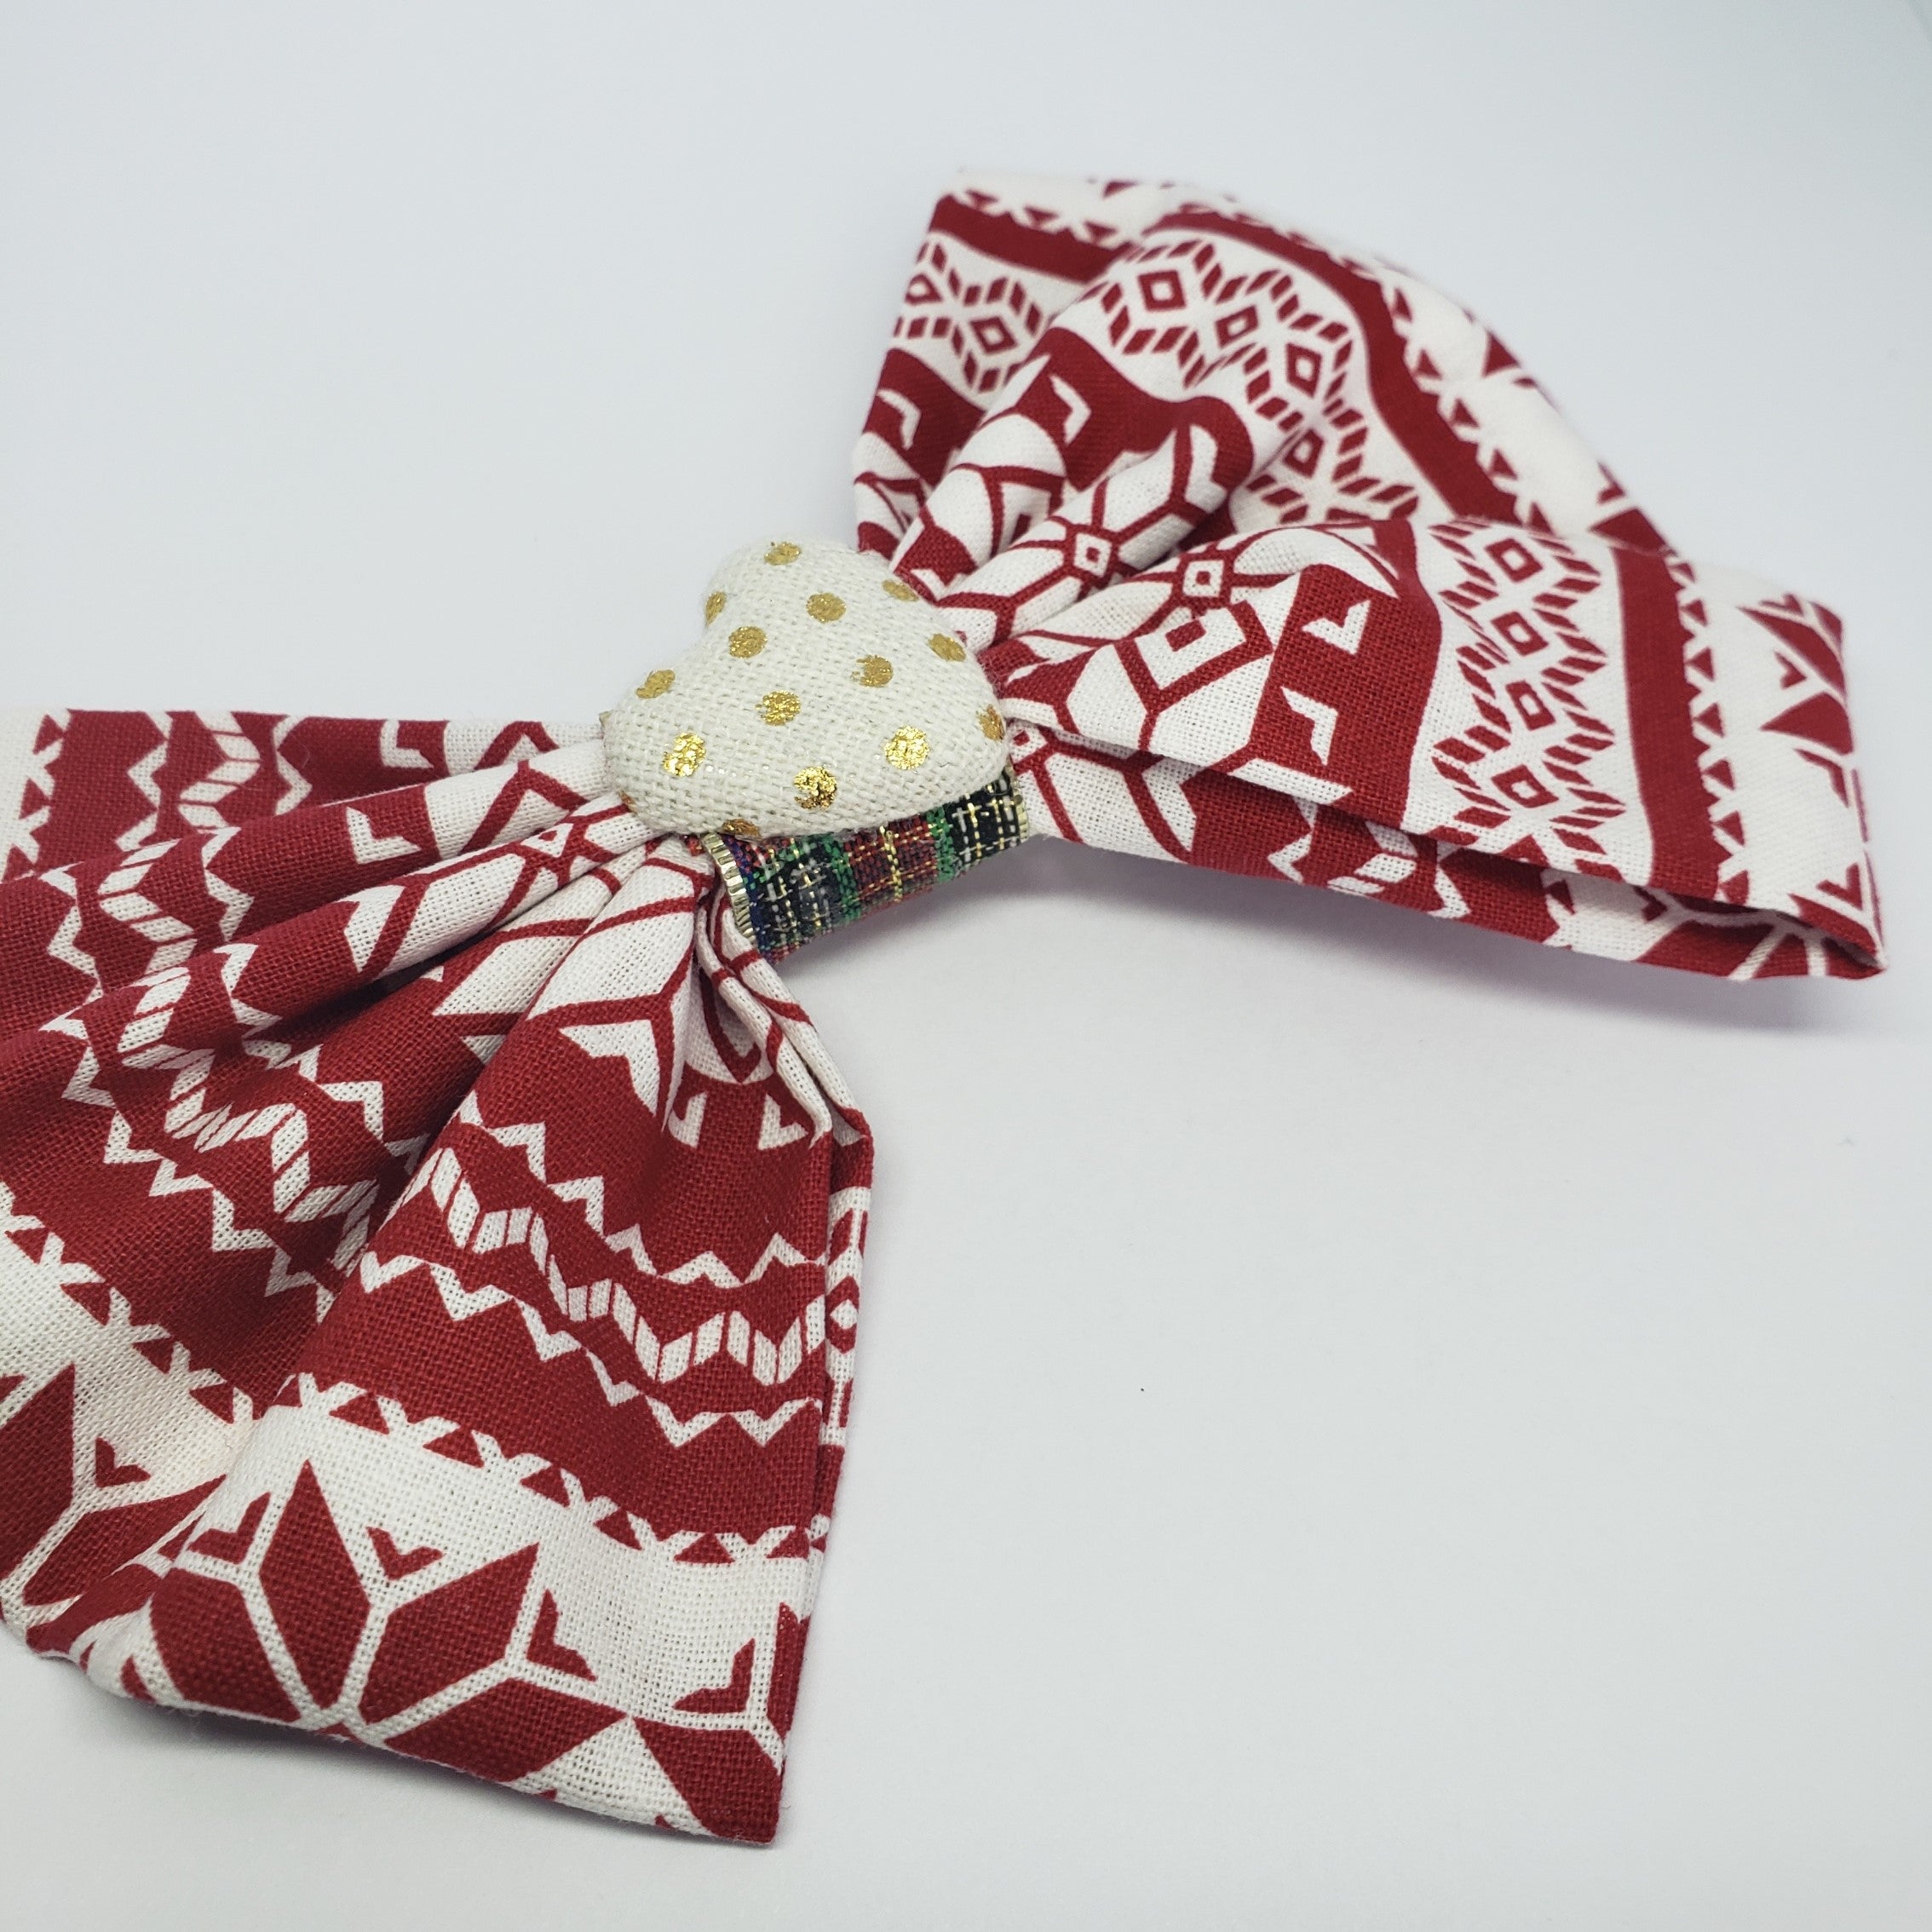 Kelsea Holiday Party Bow in Red, White & Gold - Houzz of DVA Boutique